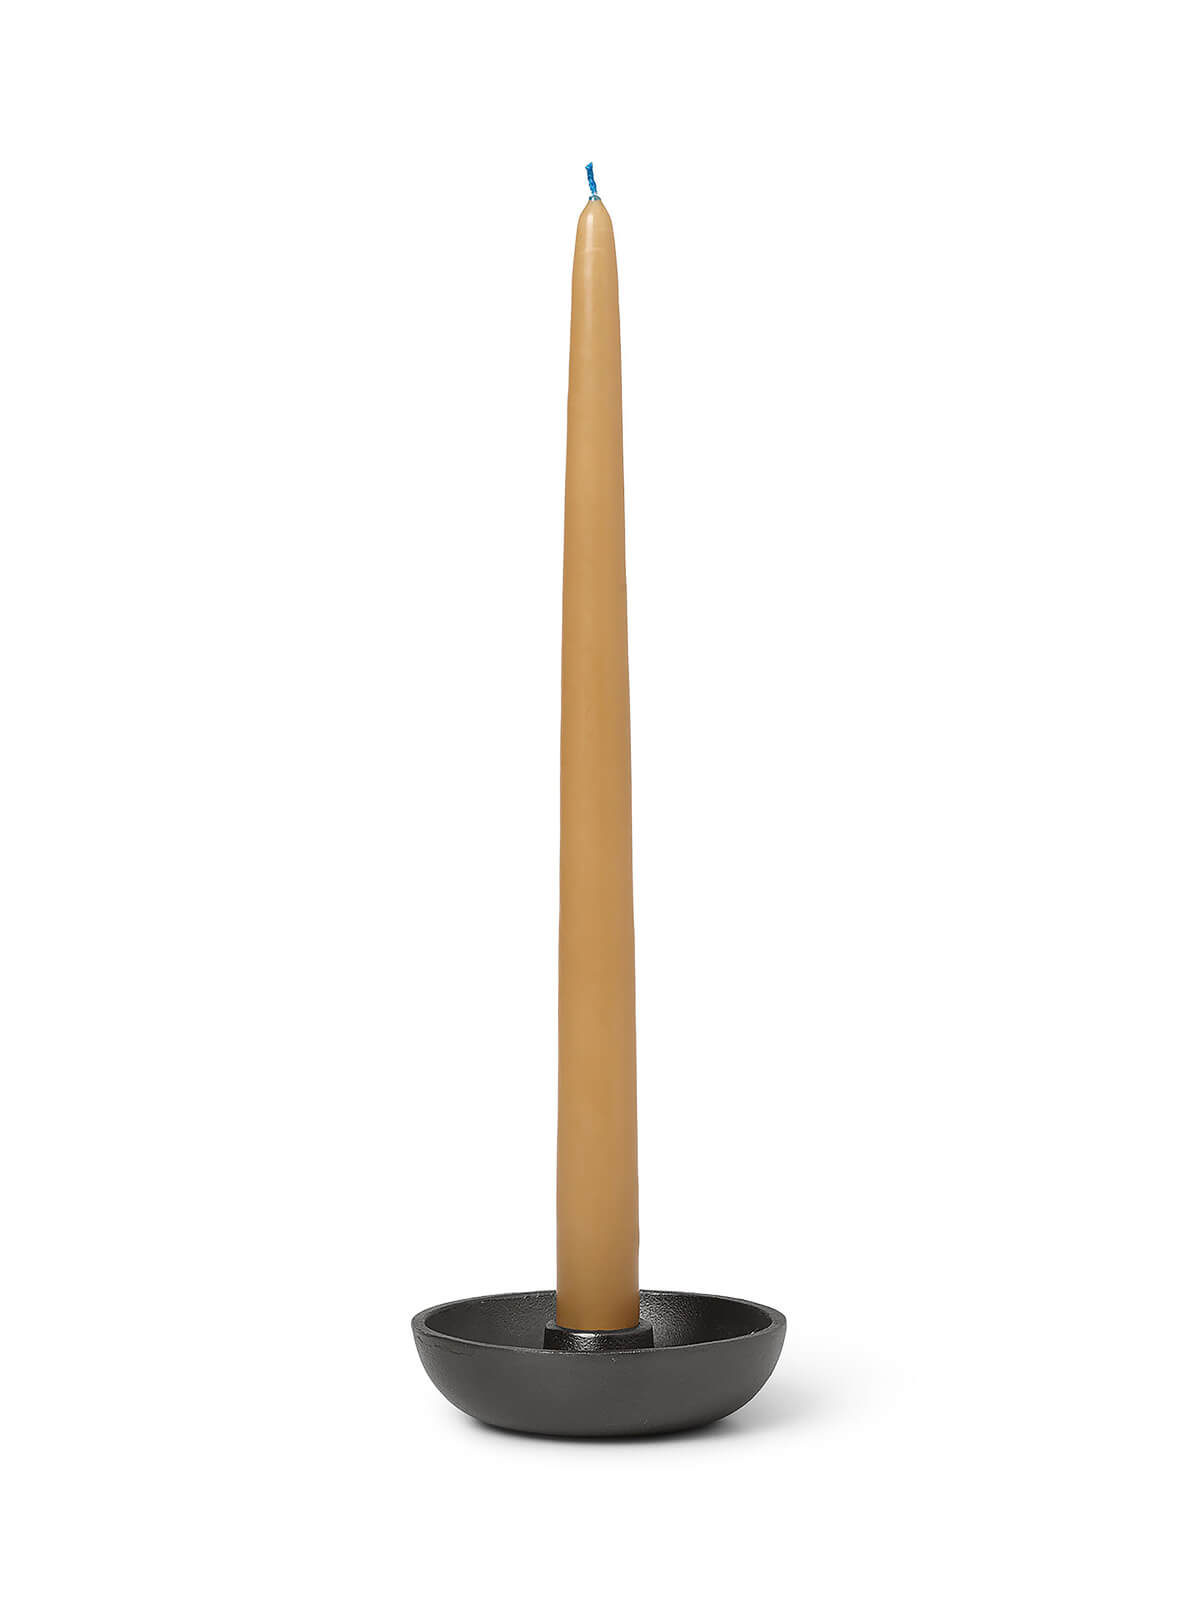 Dipped Candles | Straw | Set of 2 | by ferm Living - Lifestory - ferm LIVING